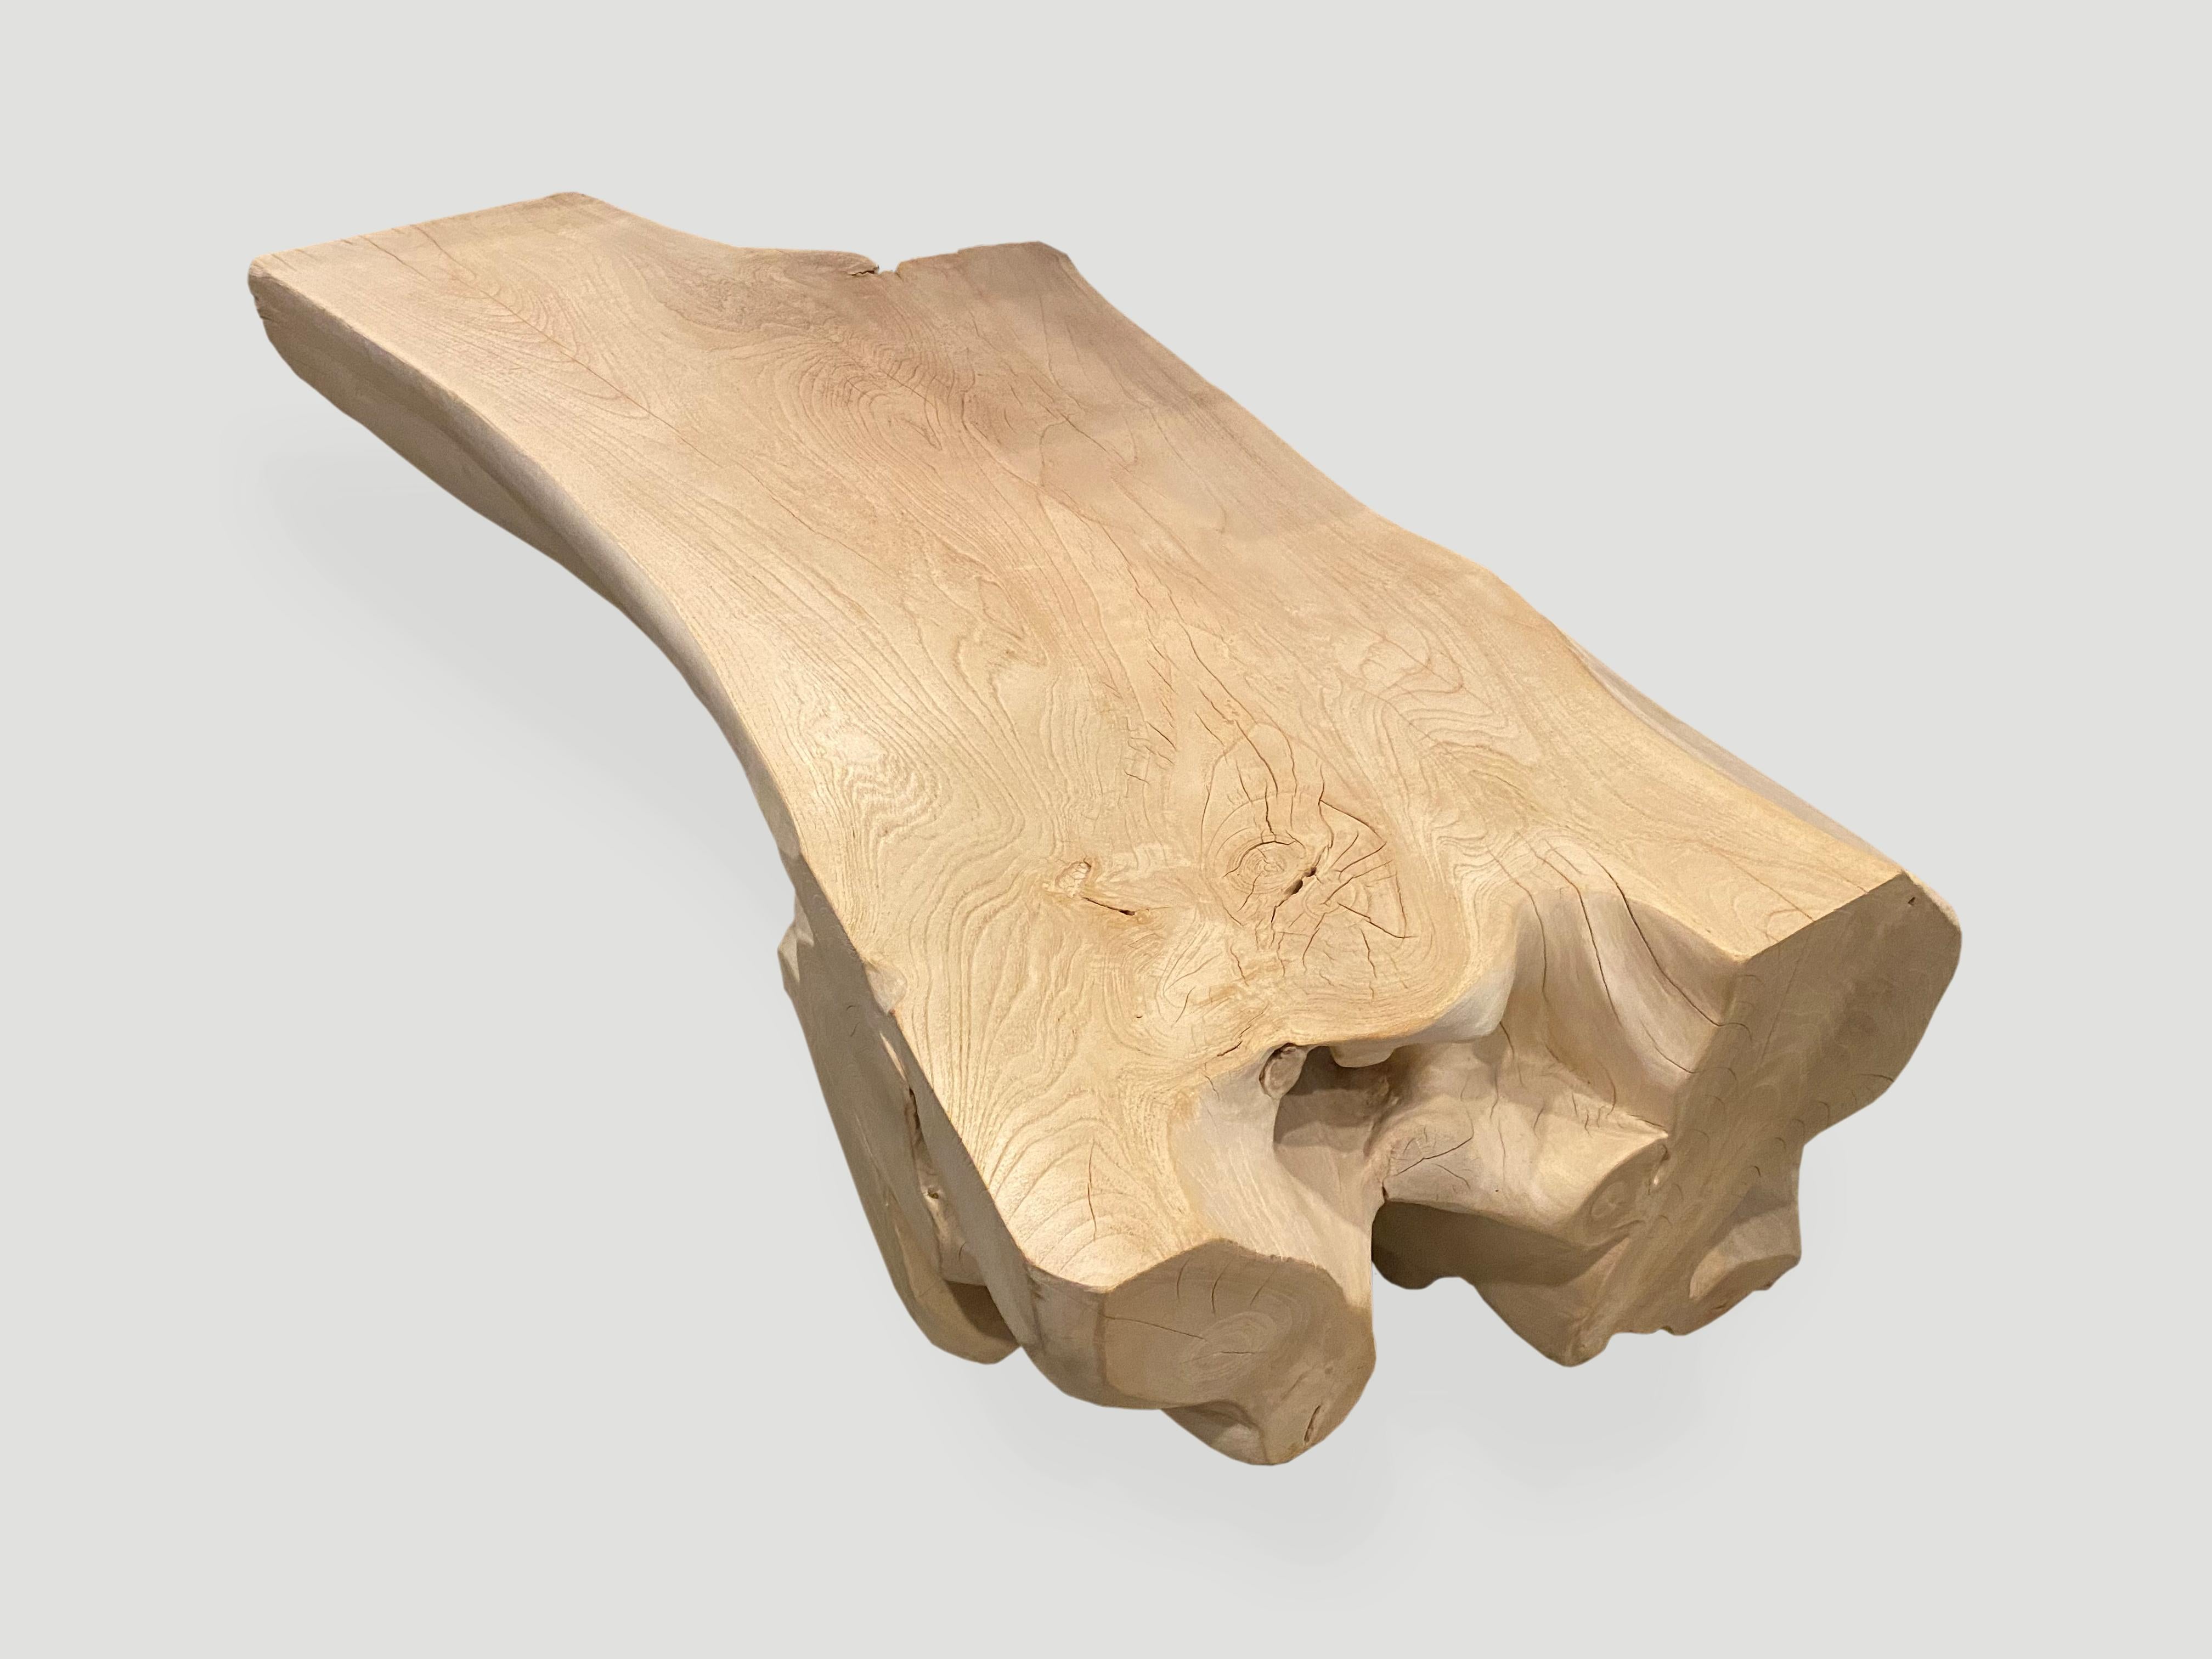 Impressive single slab coffee table or bench made from a hundred year old reclaimed teak root. We have added a light shellack on the top section. Organic is the new modern.

The St. Barts Collection features an exciting new line of organic white